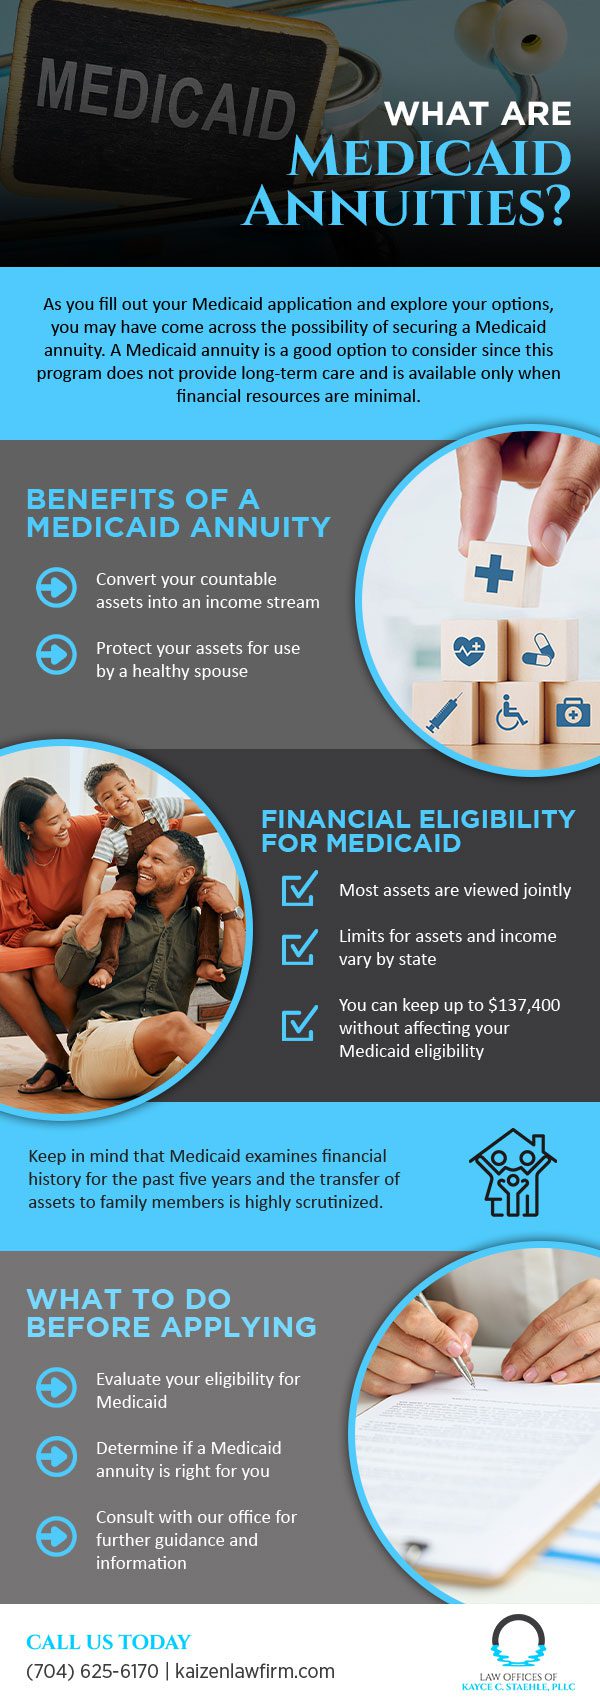 Medicaid Application: What are Medicaid Annuities?